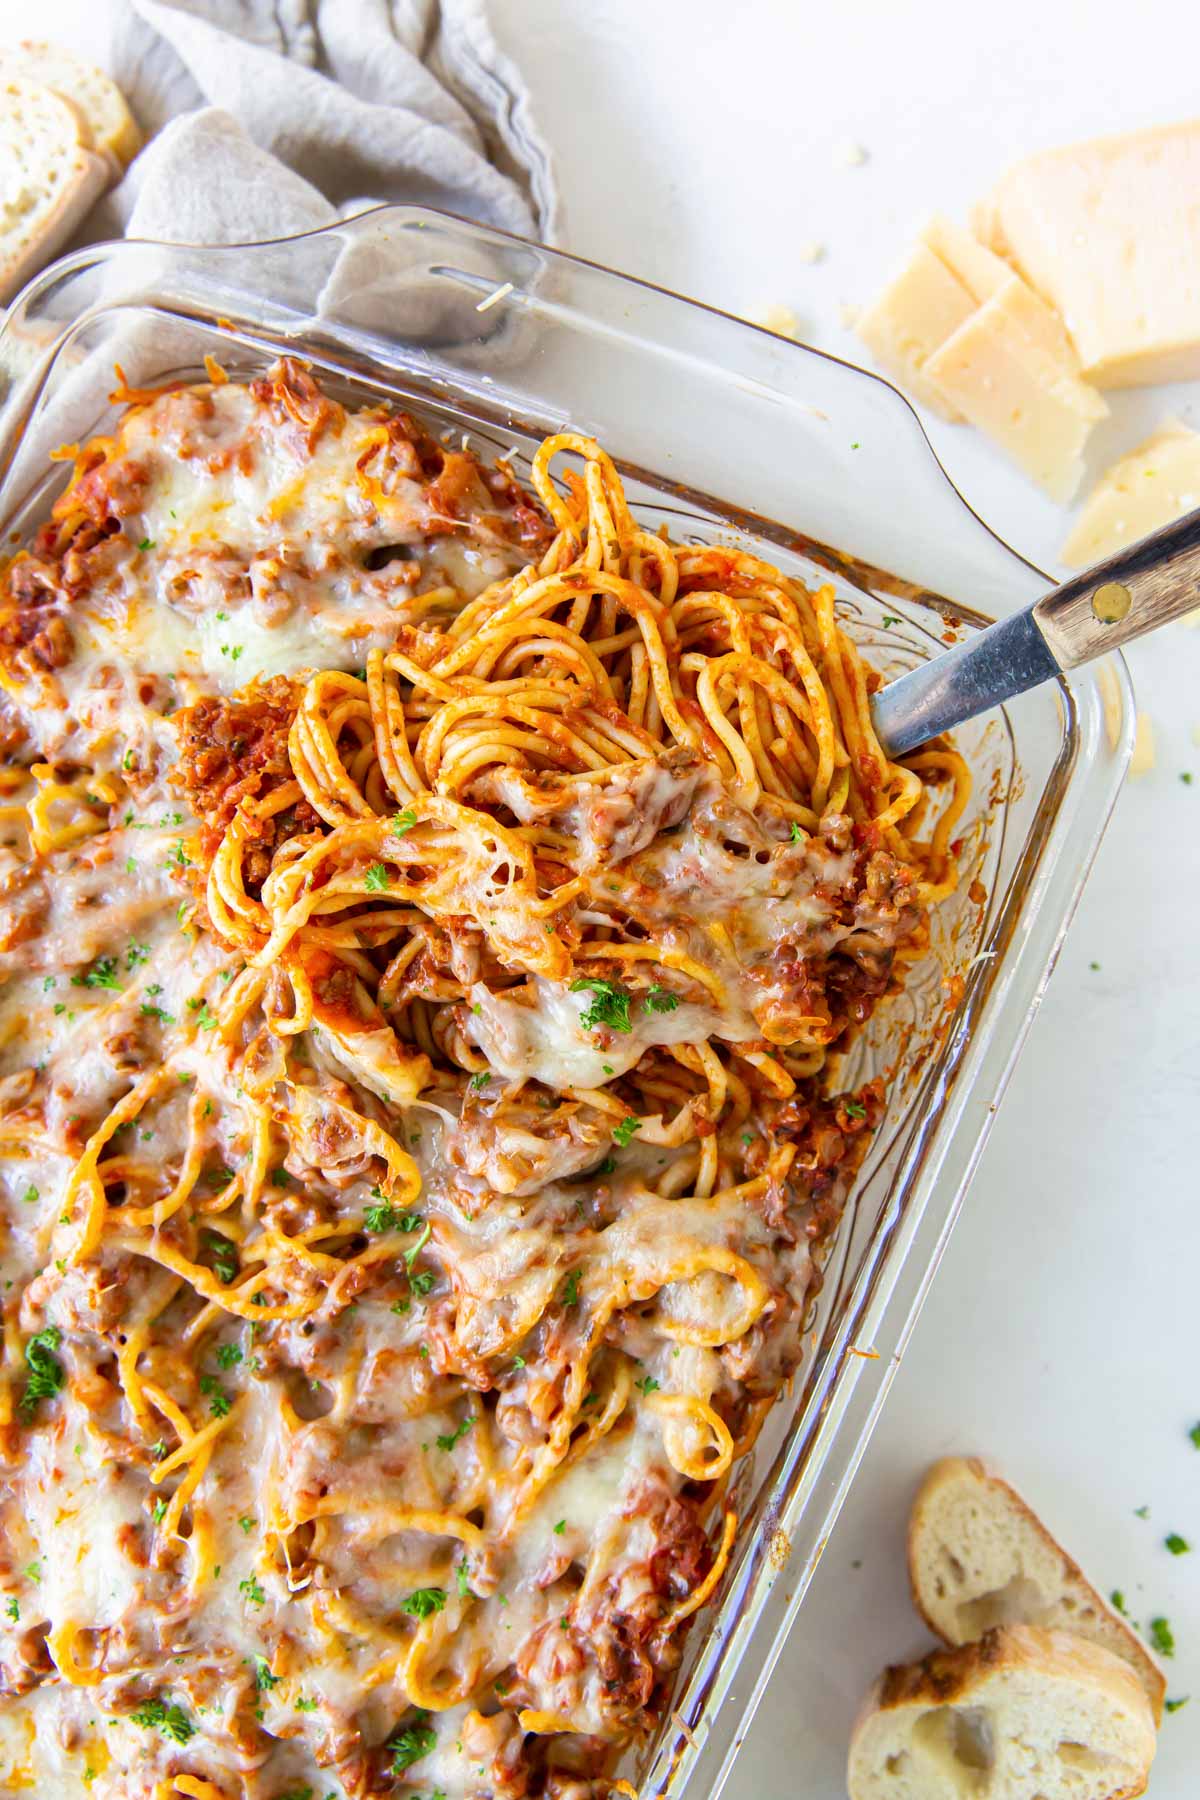 Baked spaghetti in baking dish with serving spoon.